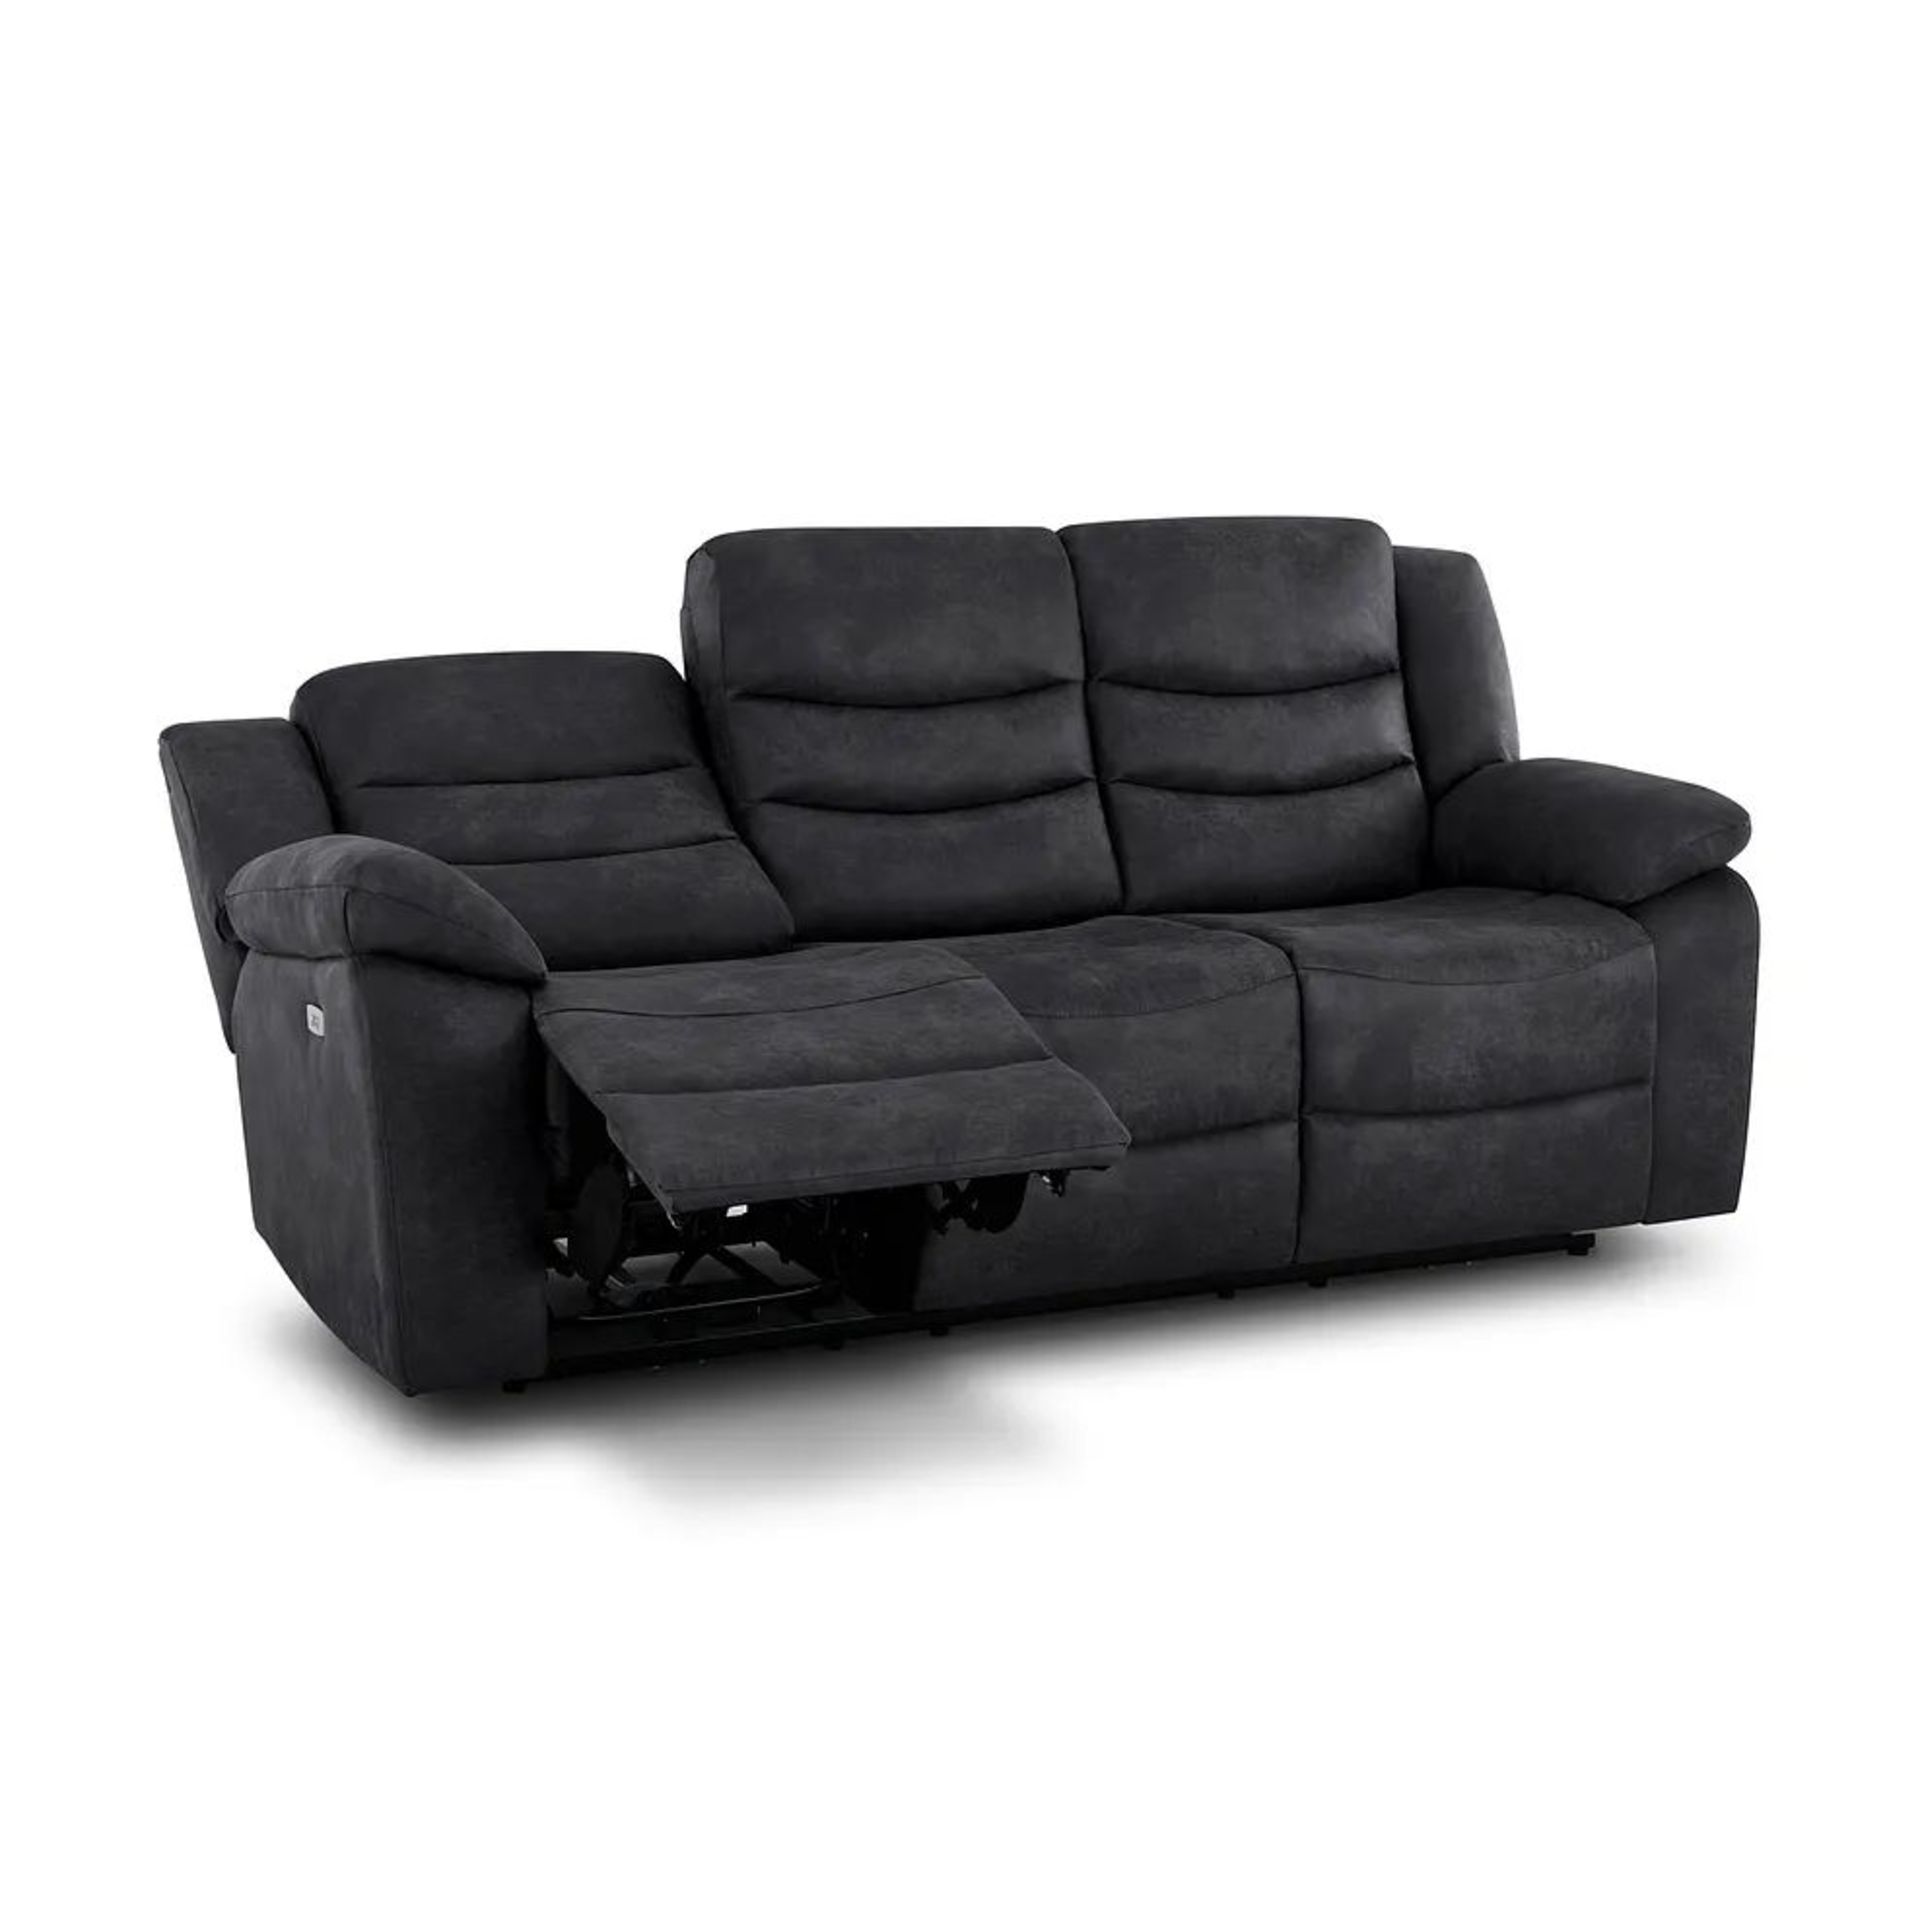 BRAND NEW MARLOW 3 Seater Electric Recliner Sofa - MILLER GREY FABRIC. RRP £1199. Designed to suit - Bild 4 aus 12